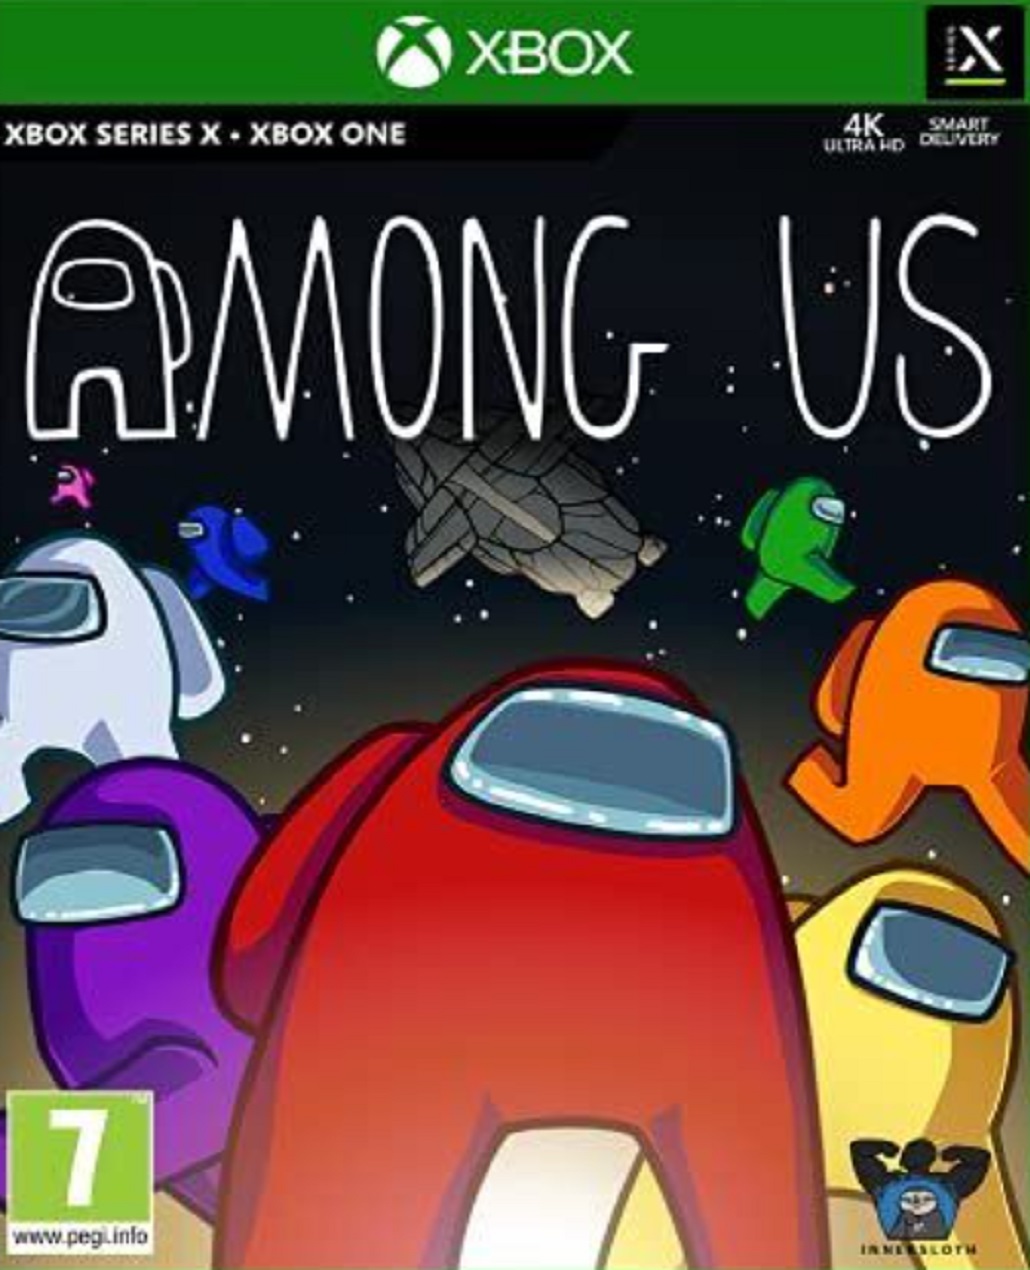 AMONG US - CREWMATE EDITION (XBOX ONE - BAZAR)